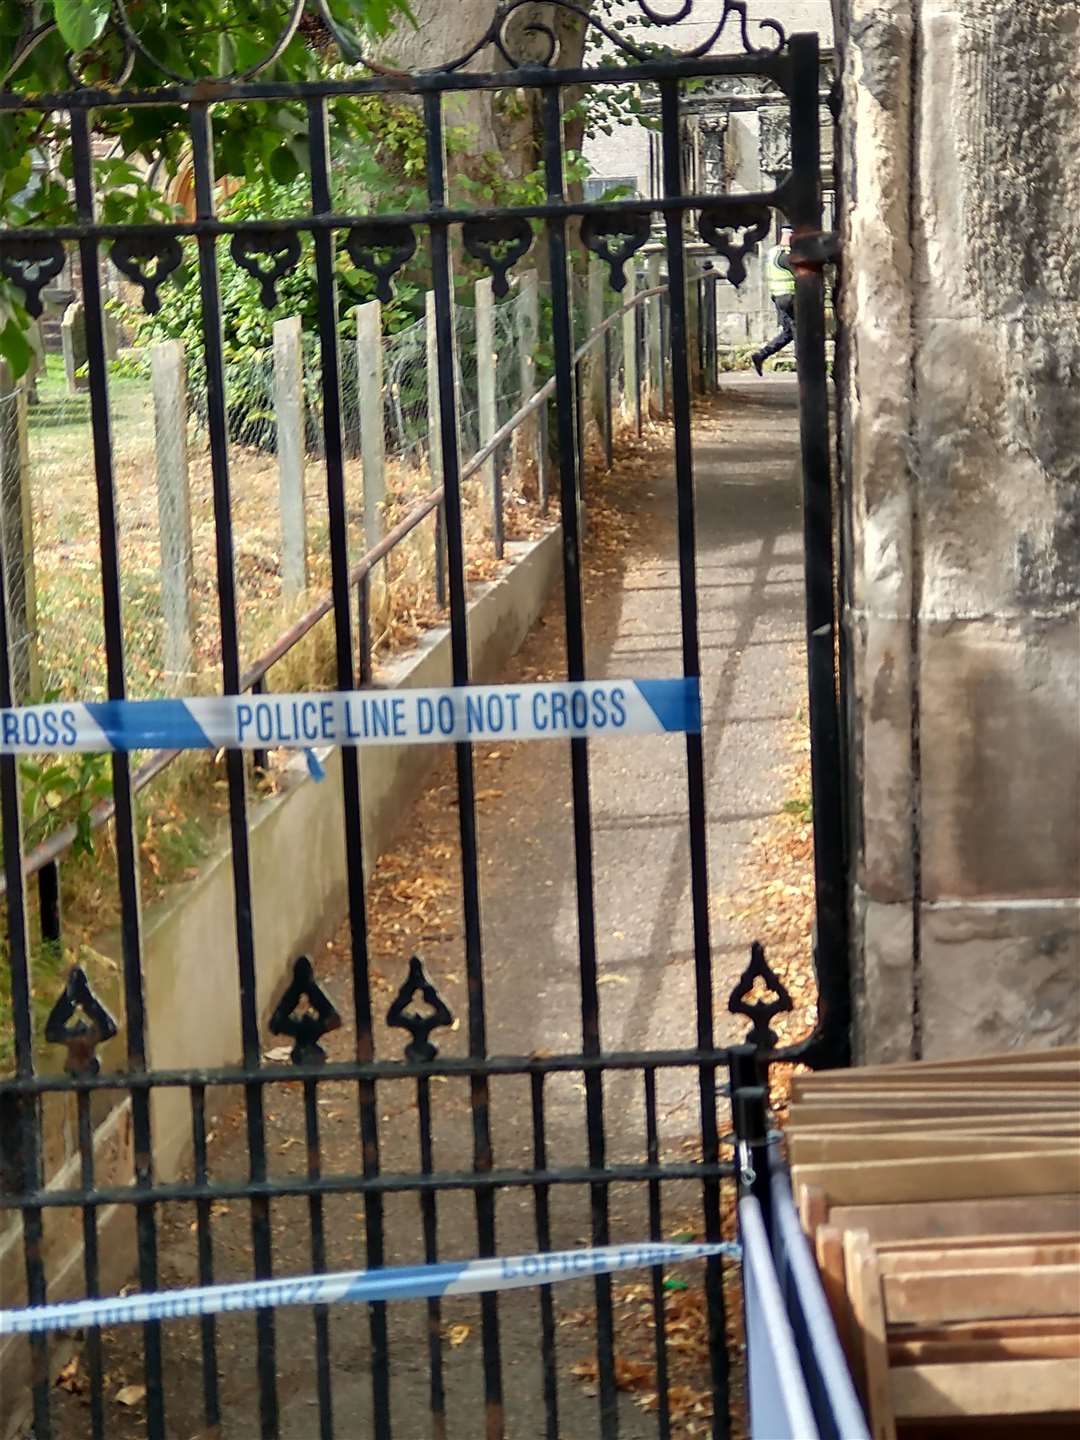 police cordon at Old High Church, Inverness